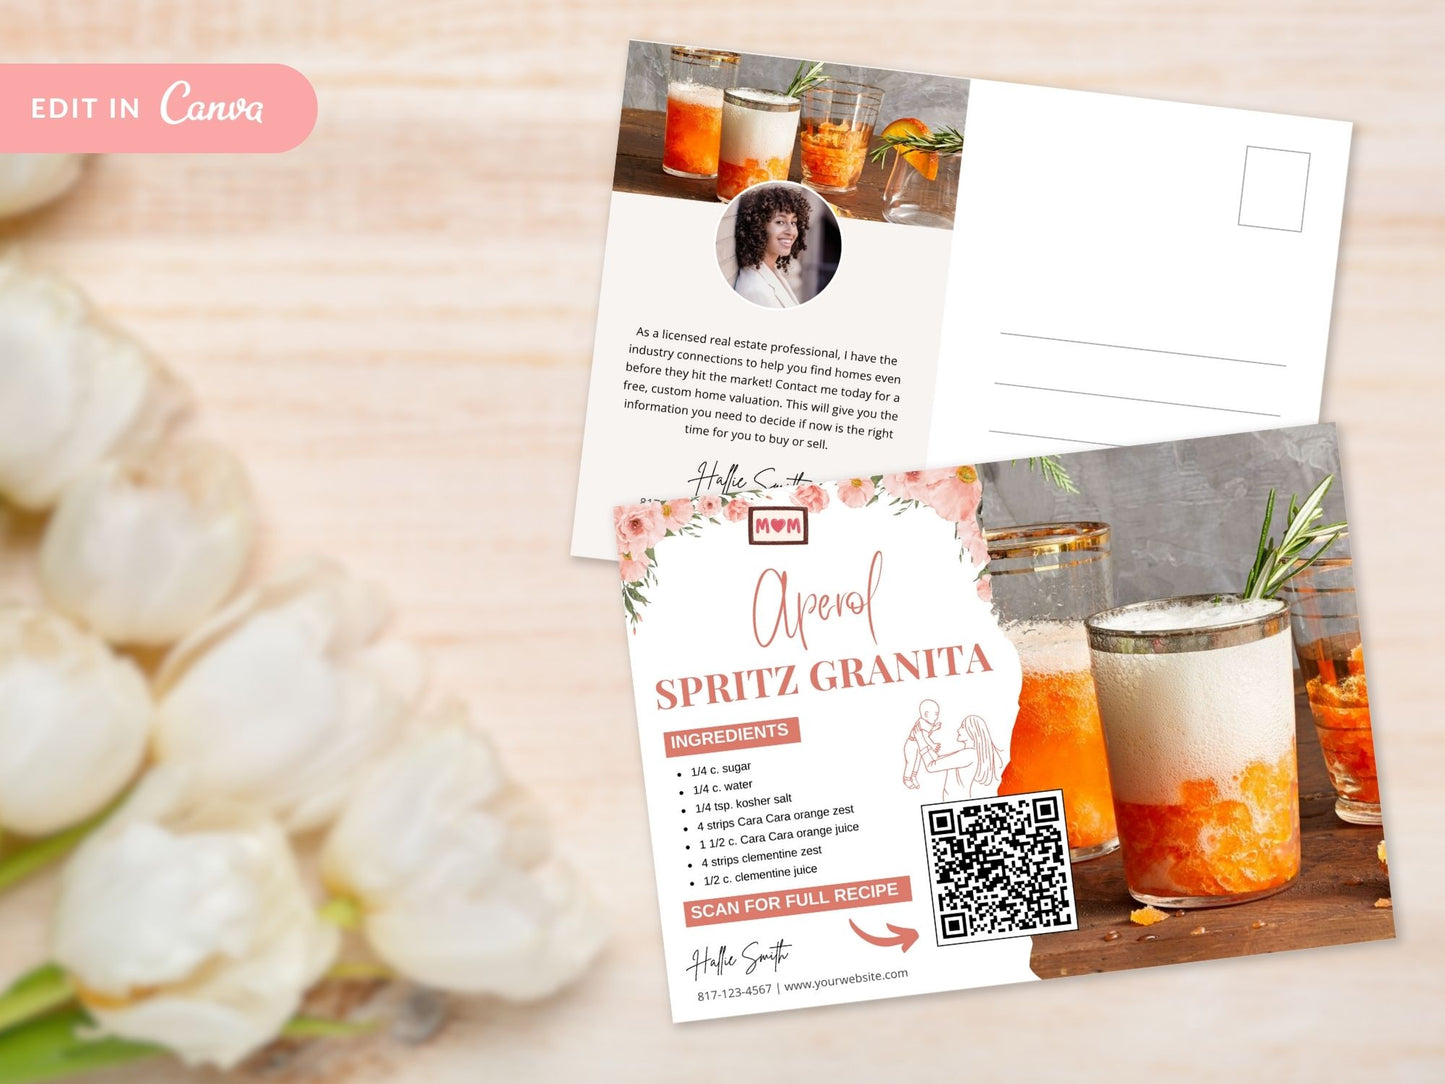 Mother's Day Recipe Postcards - Heartwarming postcards with delightful recipes for personalized real estate marketing on Mother's Day.